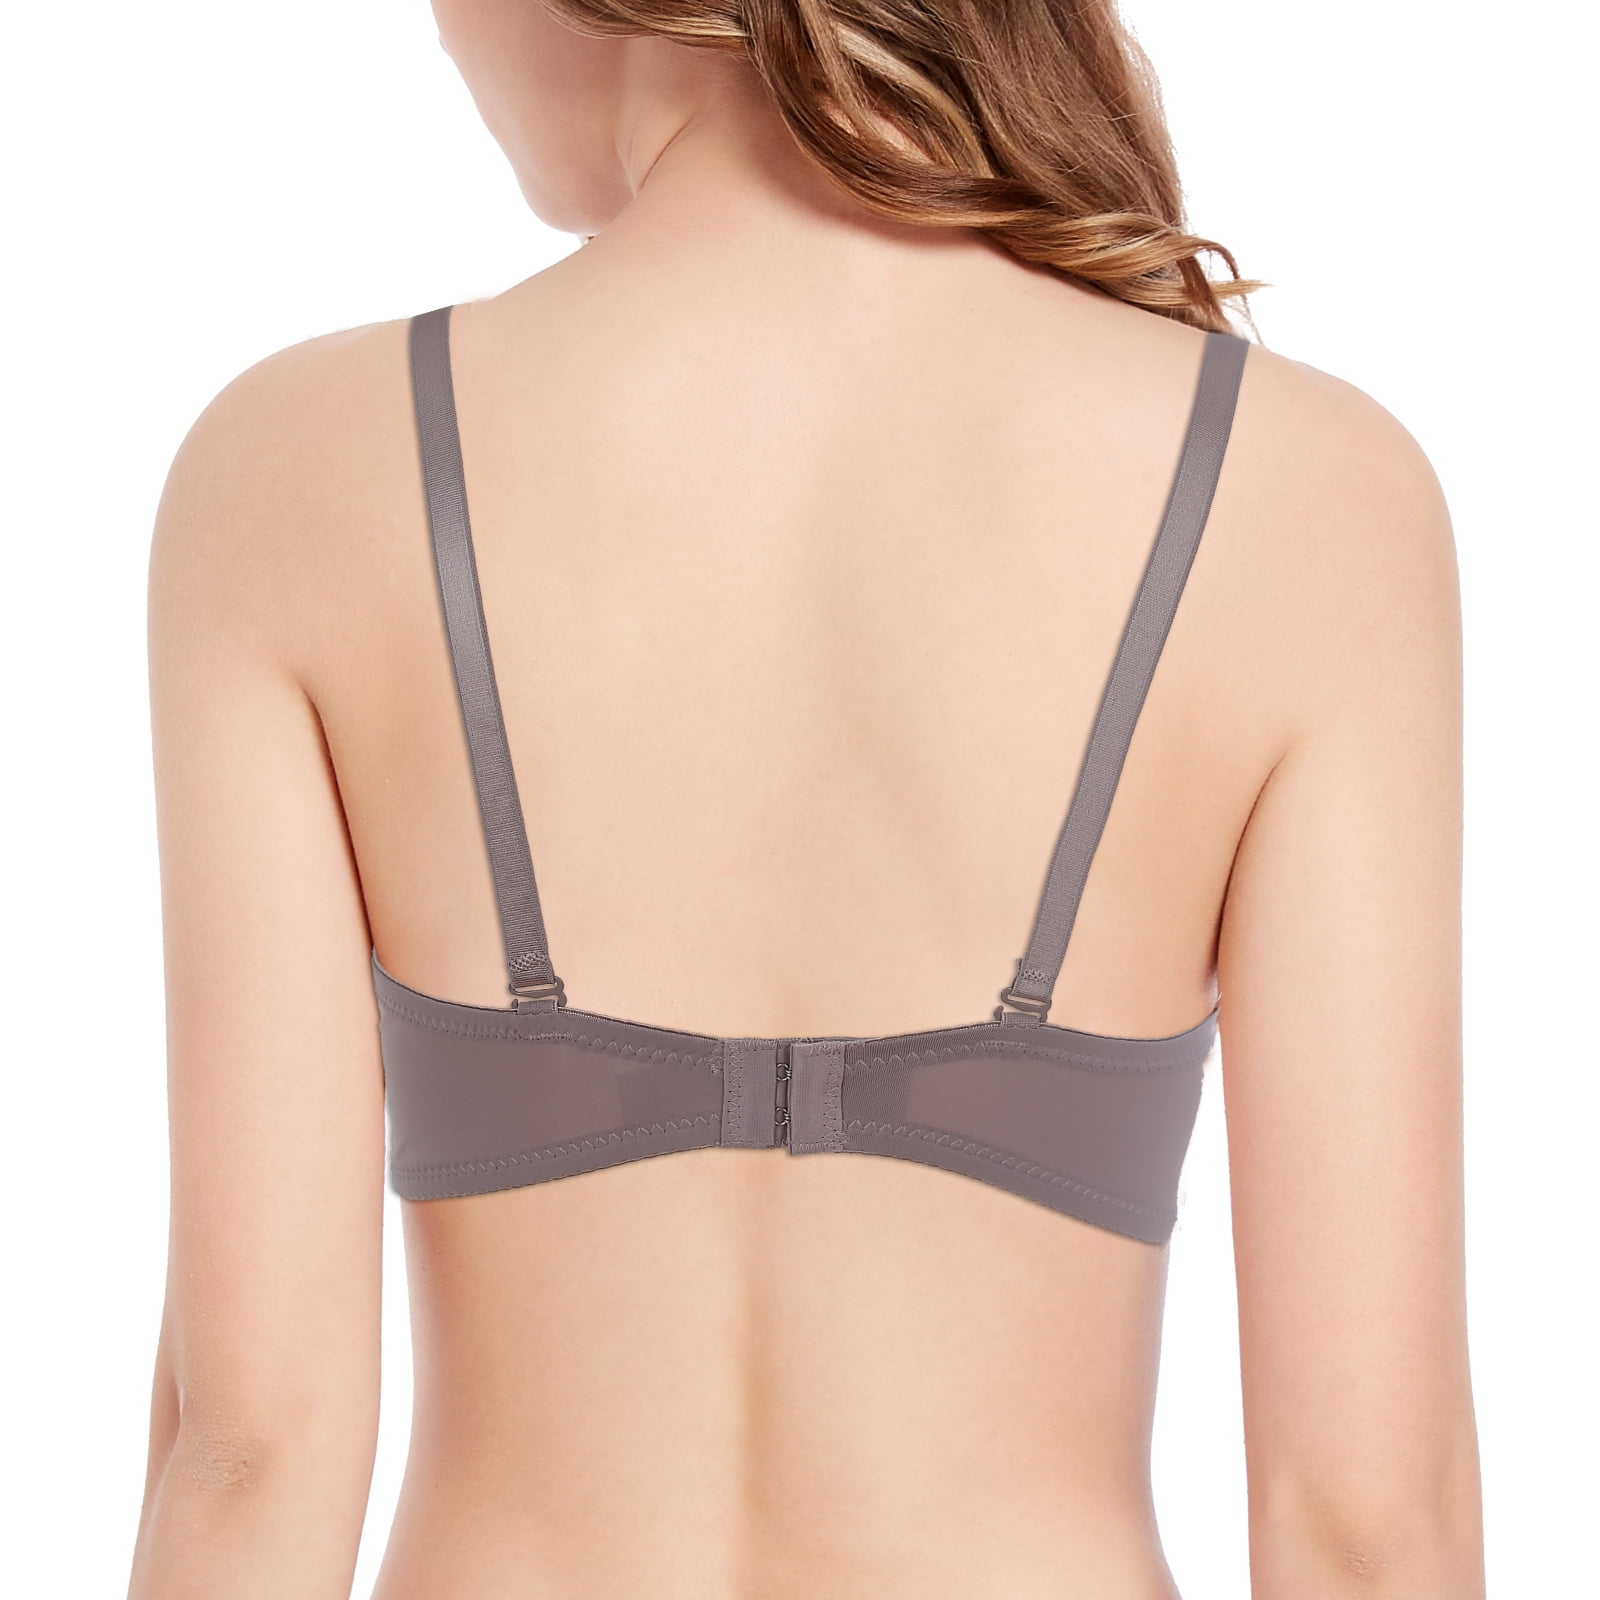 JAYCOSIN Lace Cut Out Bra With Padded Club Bralette Bras And Bustiers Size  And Double Strappy Straps Sexy Lingerie For Women IM162040 From Sadfk,  $34.64